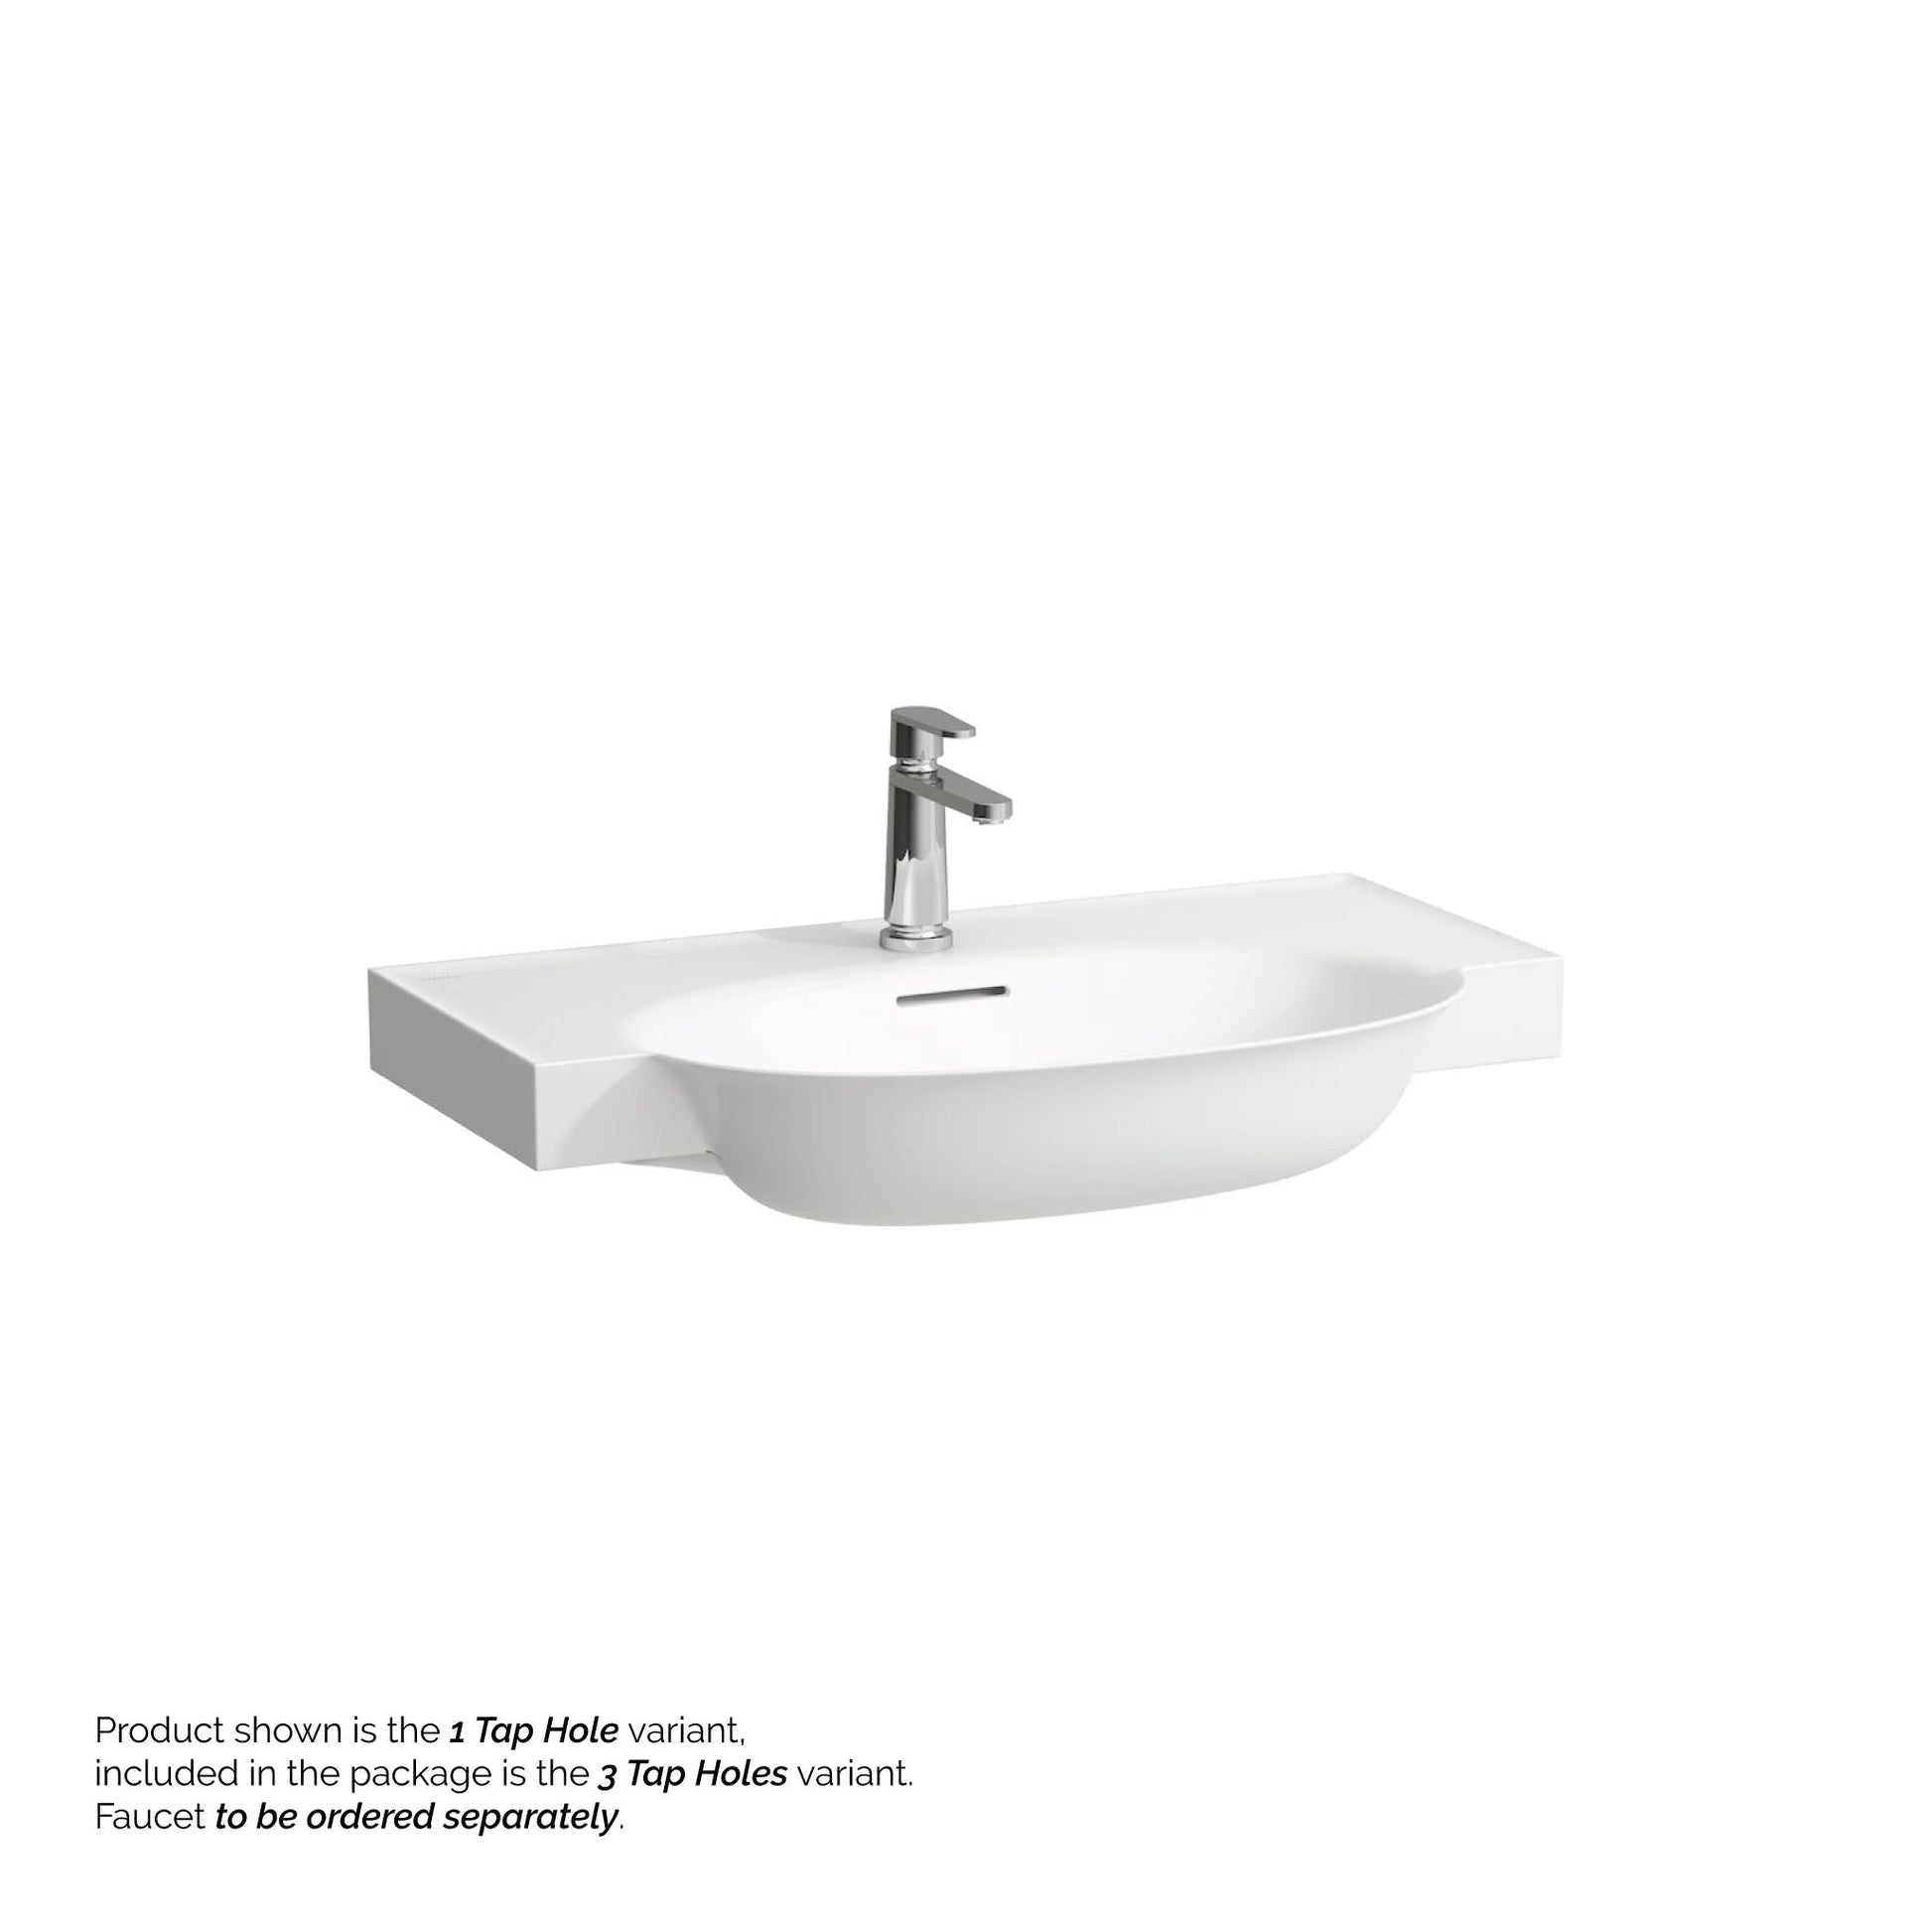 Laufen New Classic 32" x 19" White Ceramic Wall-Mounted Bathroom Sink With 3 Faucet Holes